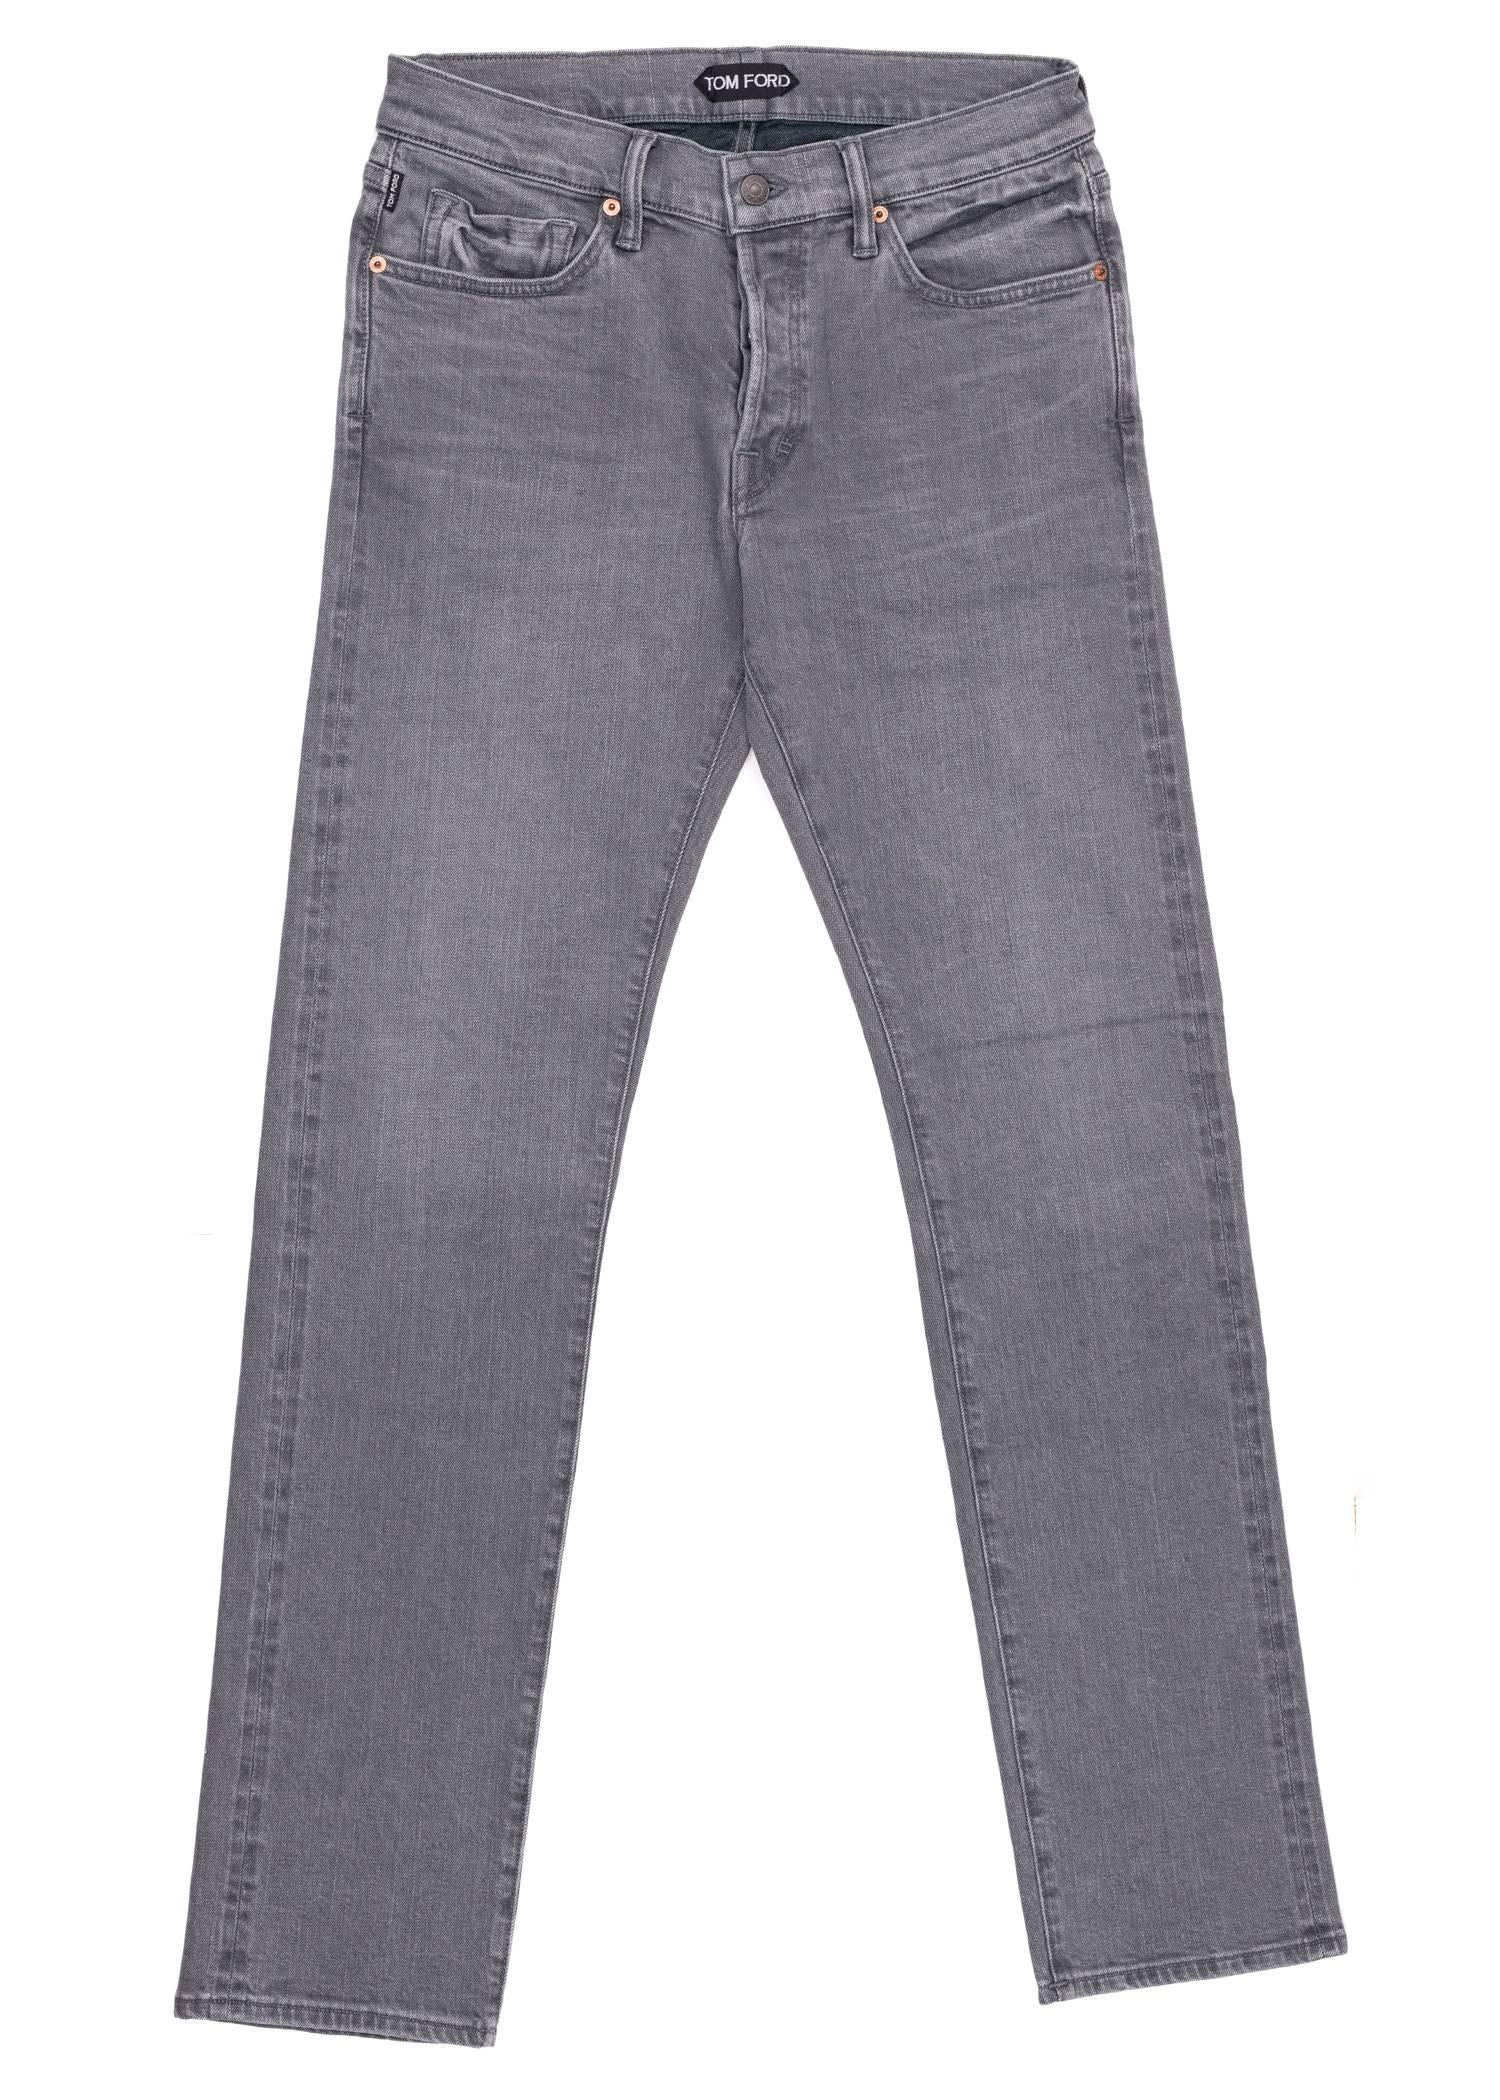 Take a stroll in your medium wash Tom Ford Selvedge Jeans. This durable pair was designed using firm aerated cotton, a straight fit, and a four button front fly design. Pair these jeans with a relaxed top for the perfect all casual look.

 ​​​​New